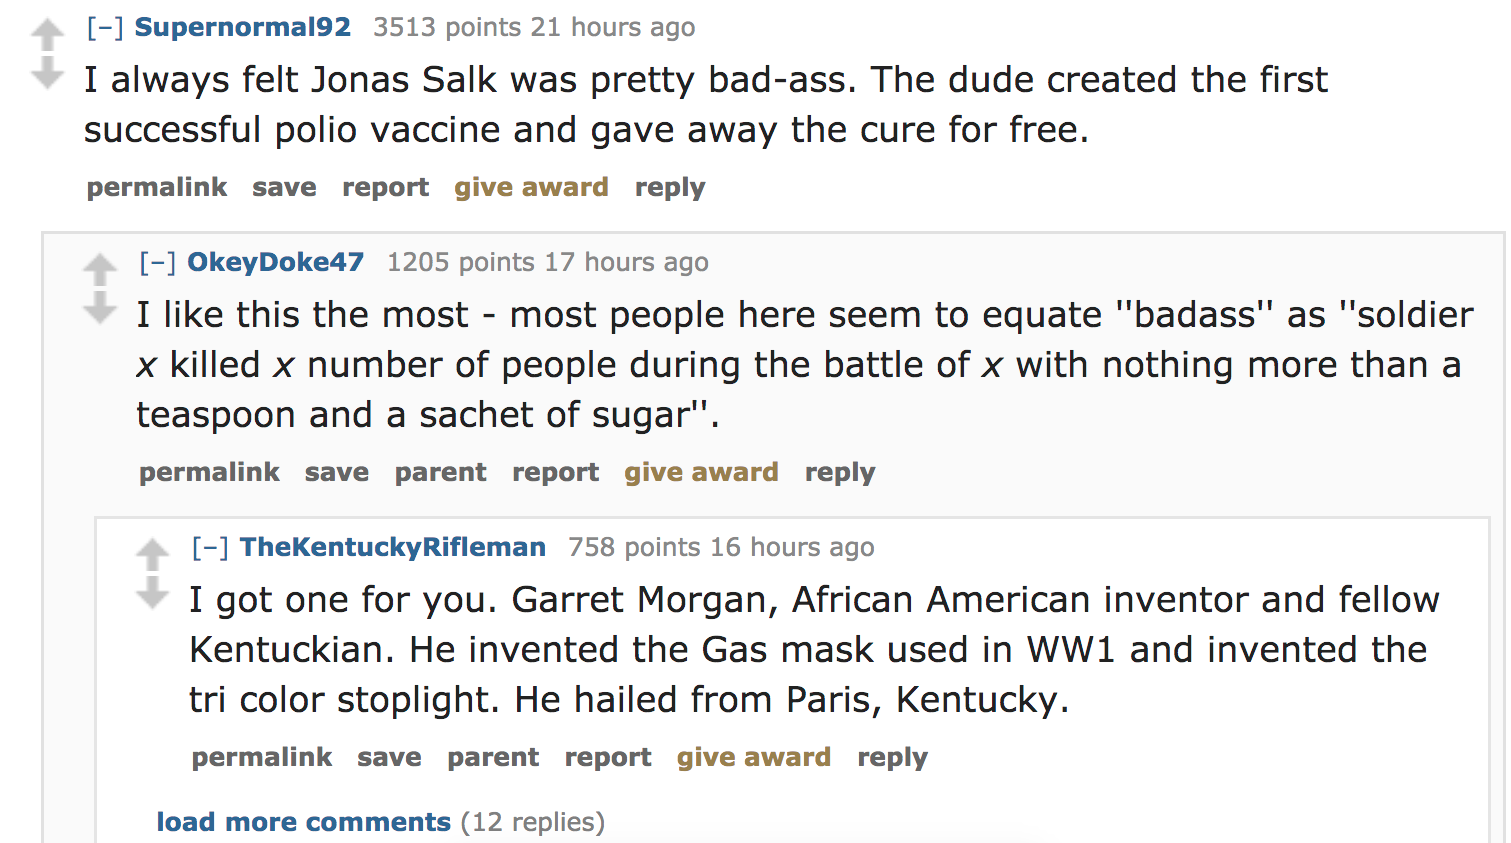 ask reddit - I always felt Jonas Salk was pretty badass. The dude created the first successful polio vaccine and gave away the cure for free. permalink save report give award OkeyDoke47 1205 points 17 hours